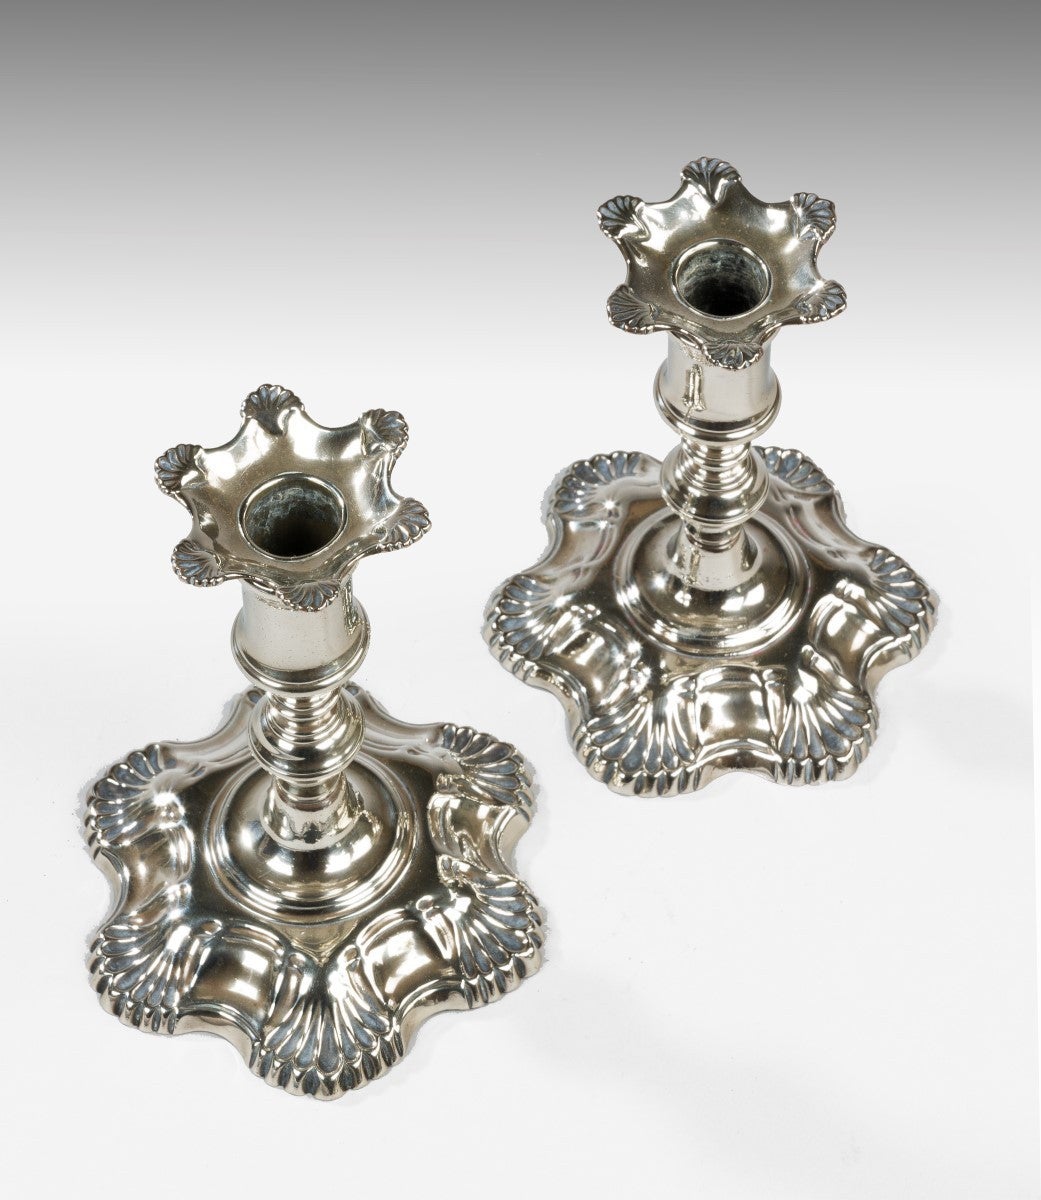 Probably Canton.

Unusually, with proportionately tall nozzles, original bobeches; and on short screw stems and shell bases. Original foundry patched on reverse.

Bibliography: See Keith Pinn, 'Paktong: The Chinese Alloy in Europe, 1680-1820'